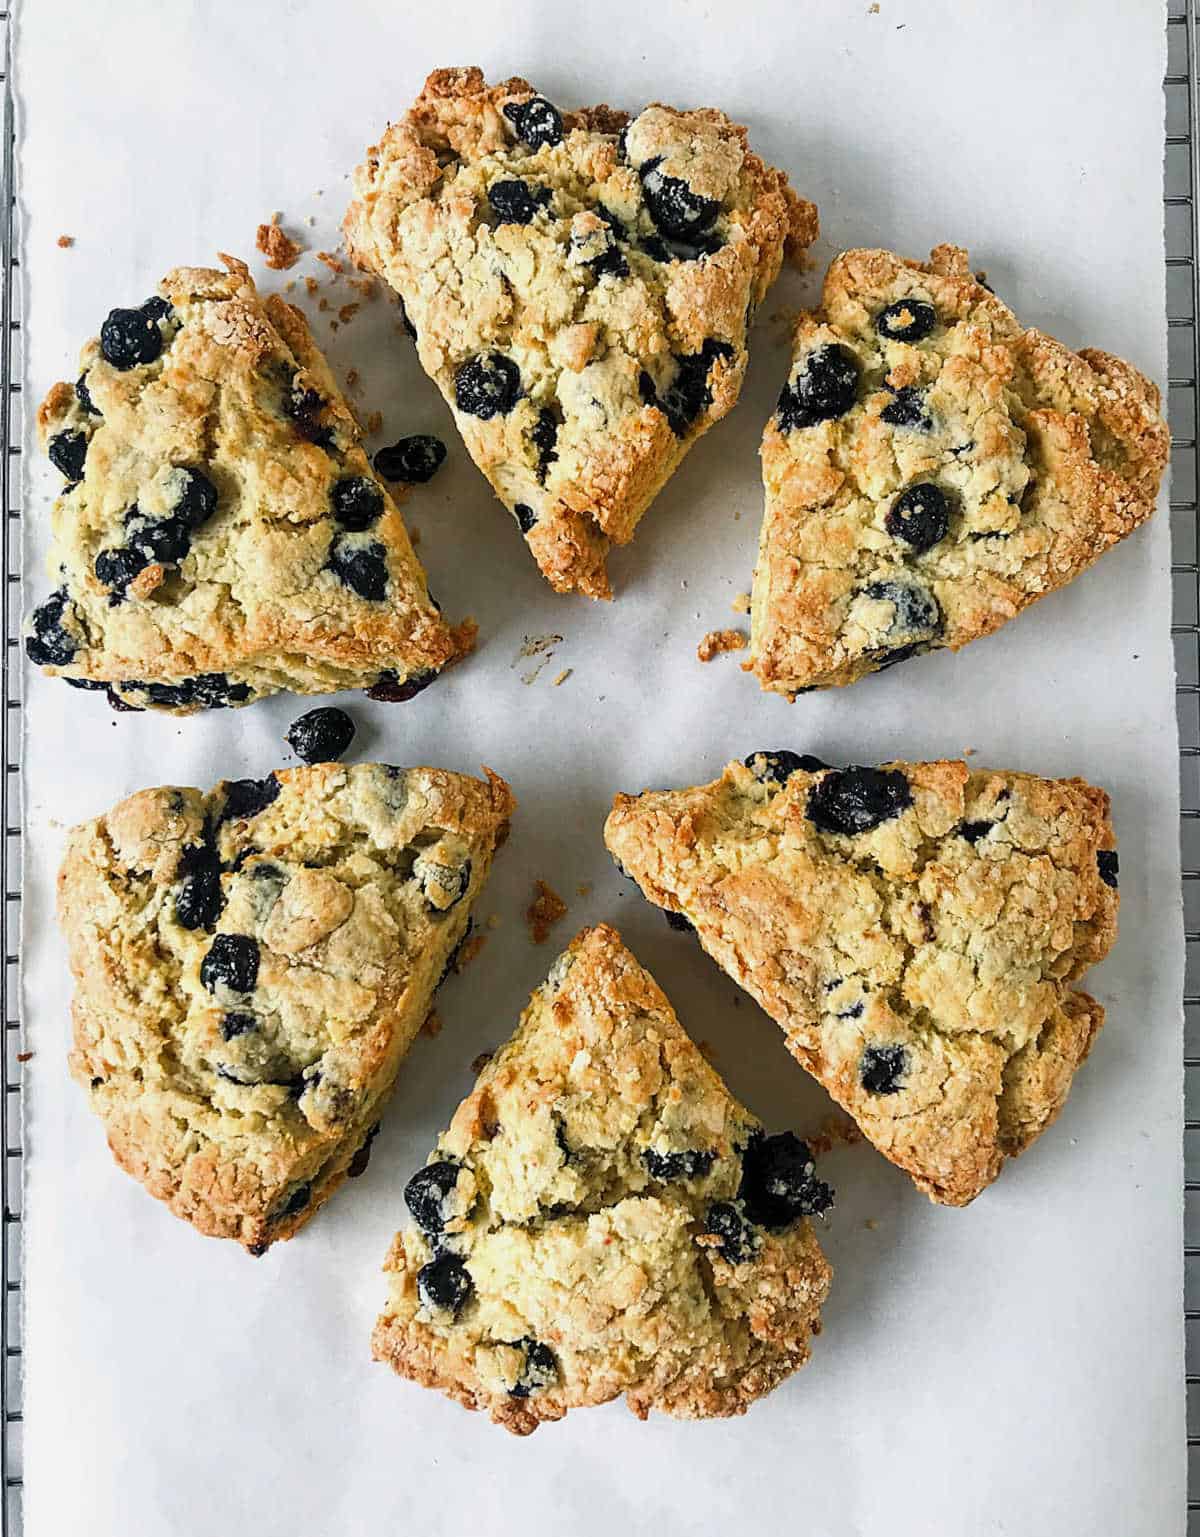 Top view of baked blueberry scones in a circle on white parchment paper.